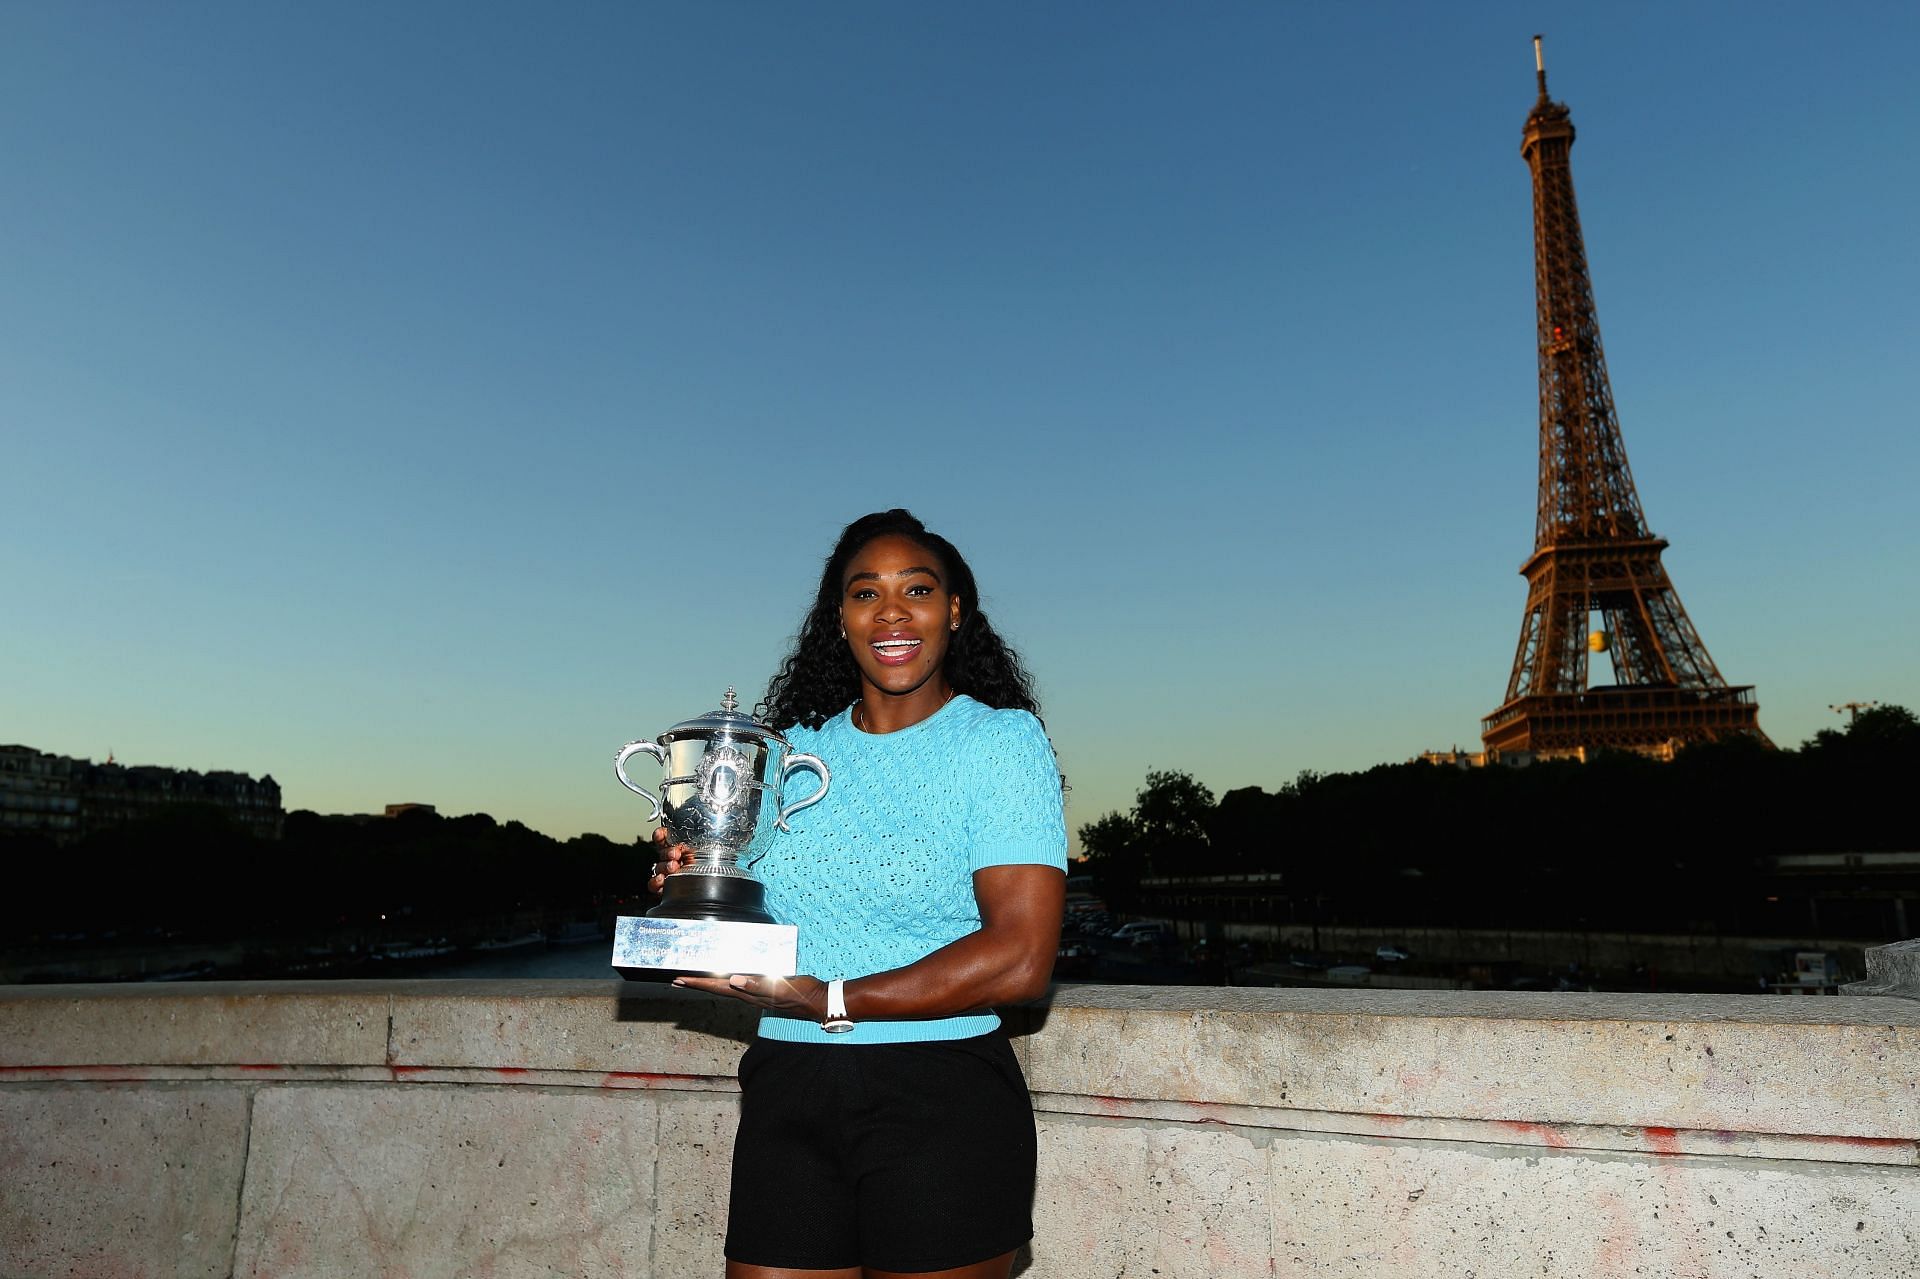 Serena Williams with the 2013 Roland Garros trophy